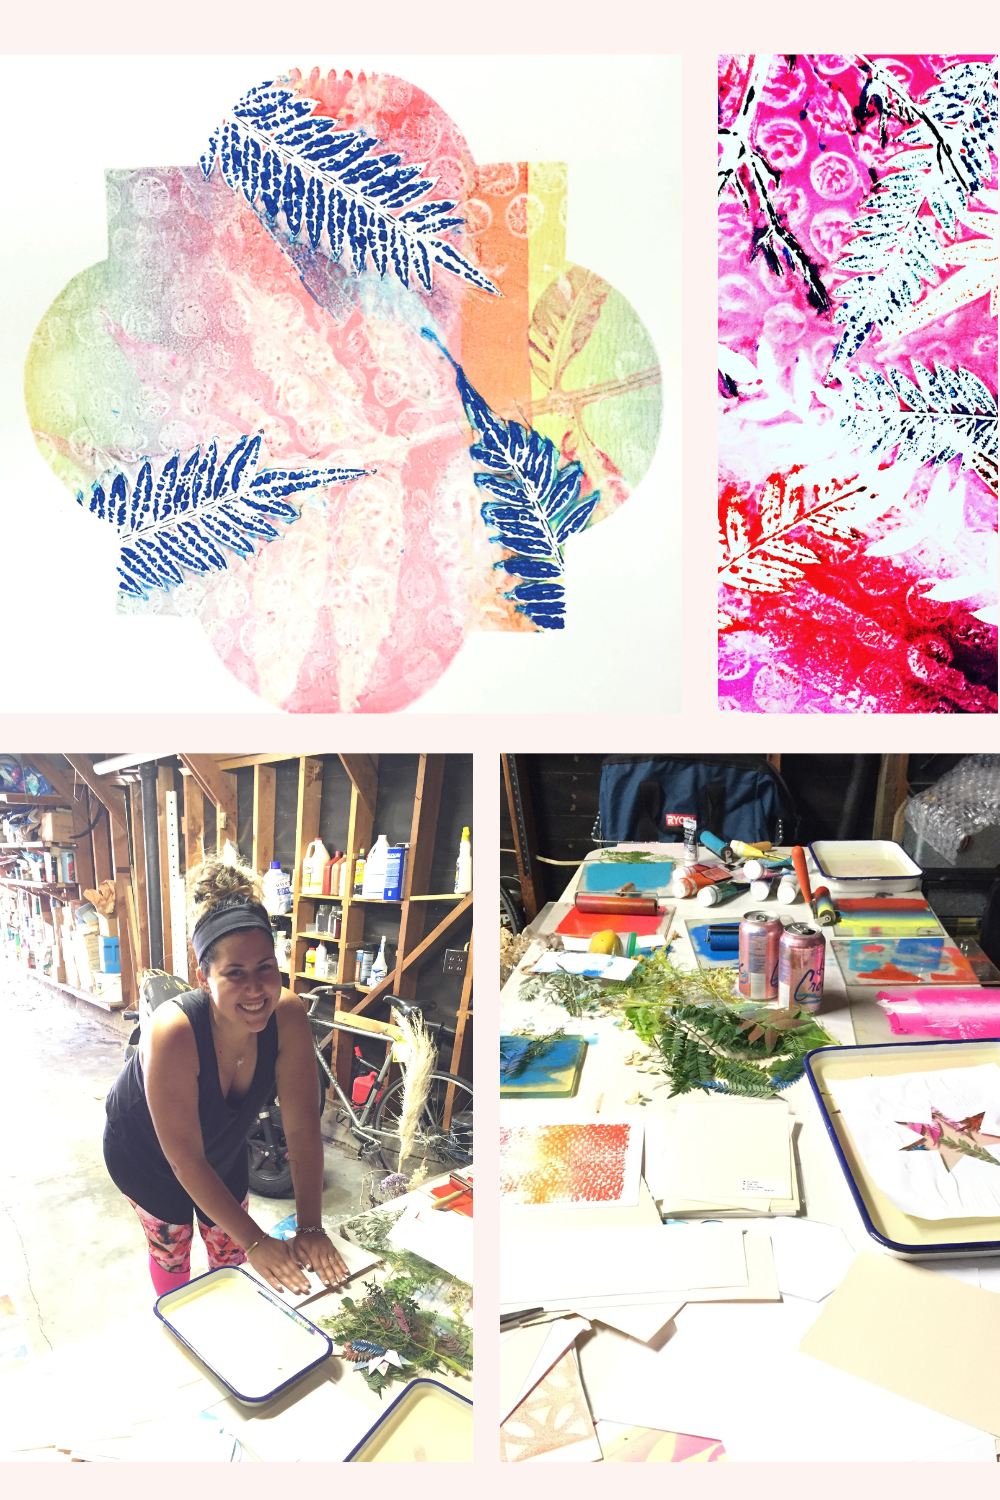 Art workshop set up with gelli plate printmaking and brightly colored inks